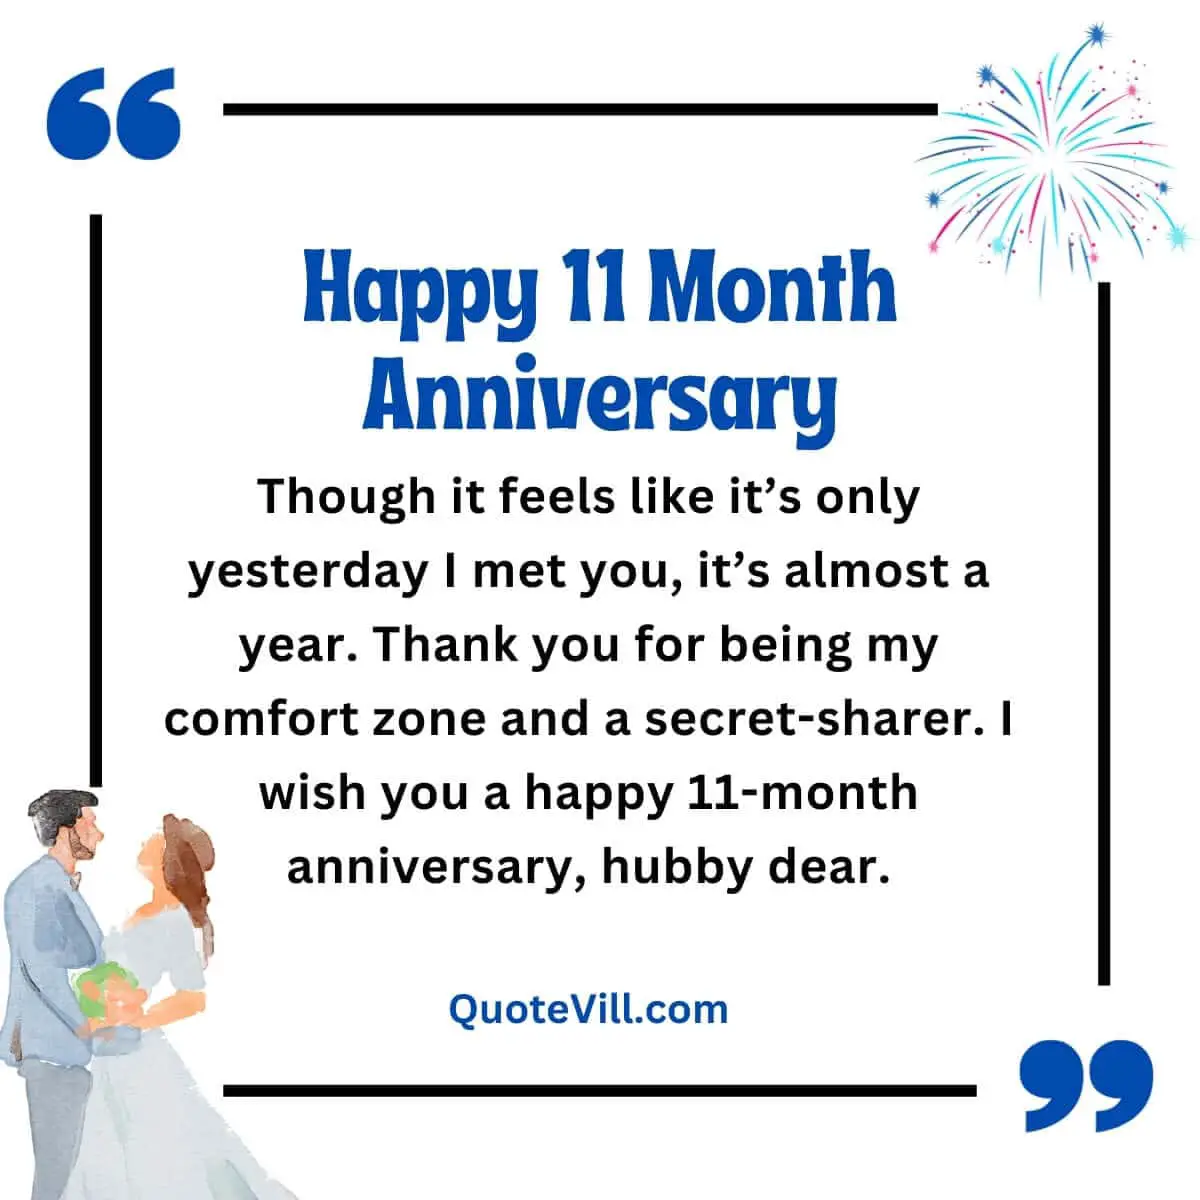 Happy 11 Month Anniversary Wishes and Messages